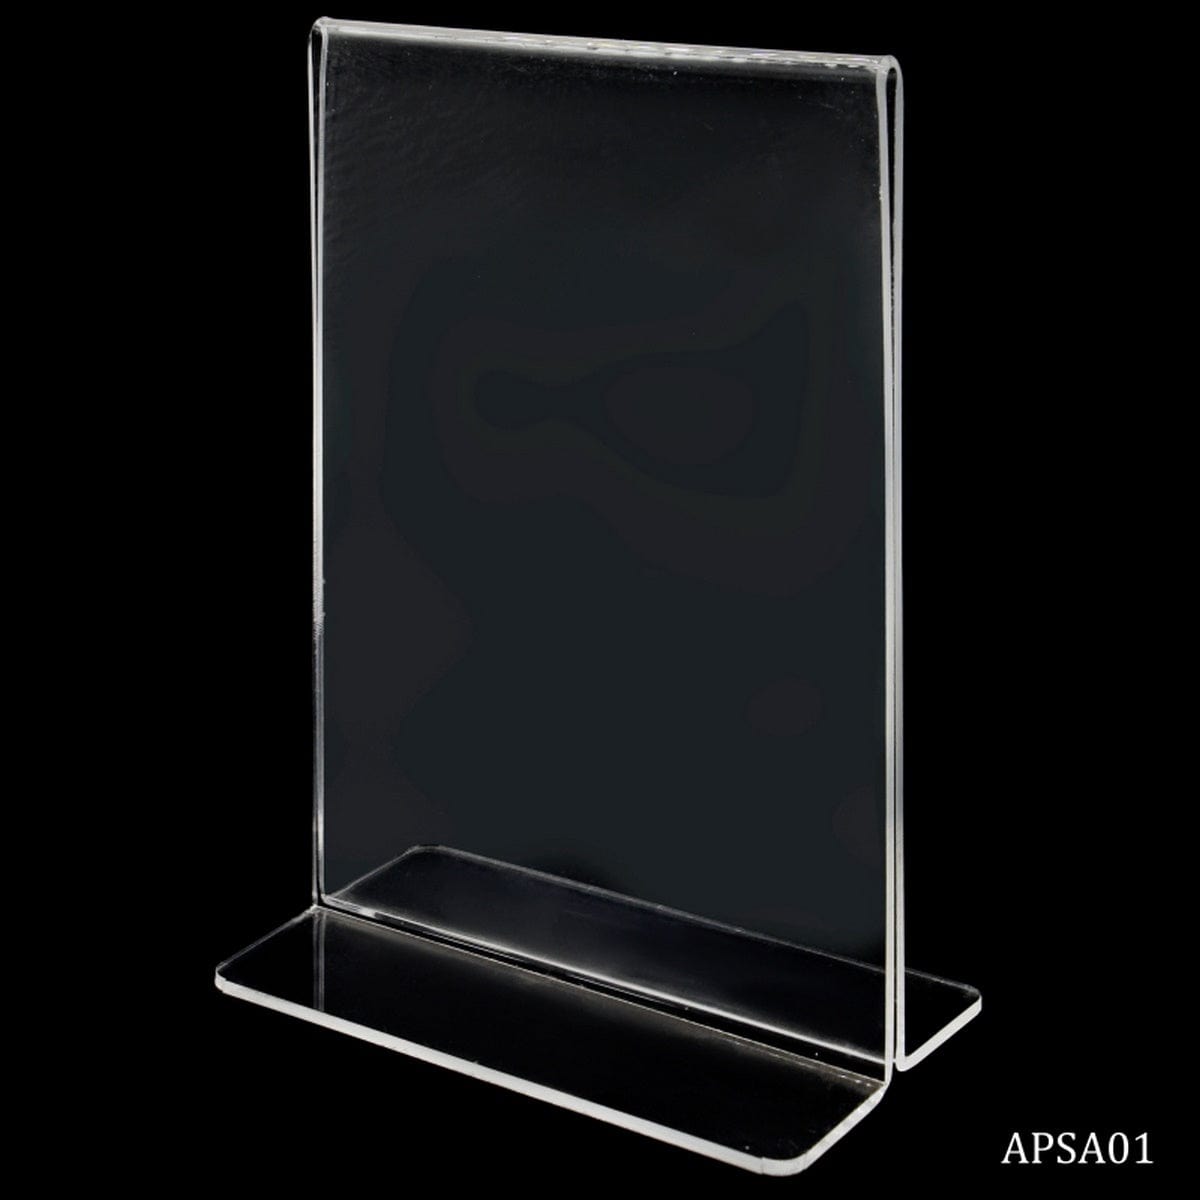 jags-mumbai Acrylic Display Stands Compact and Convenient: The Acrylic Paper Stand for A6 4x6-sized Documents and Photos